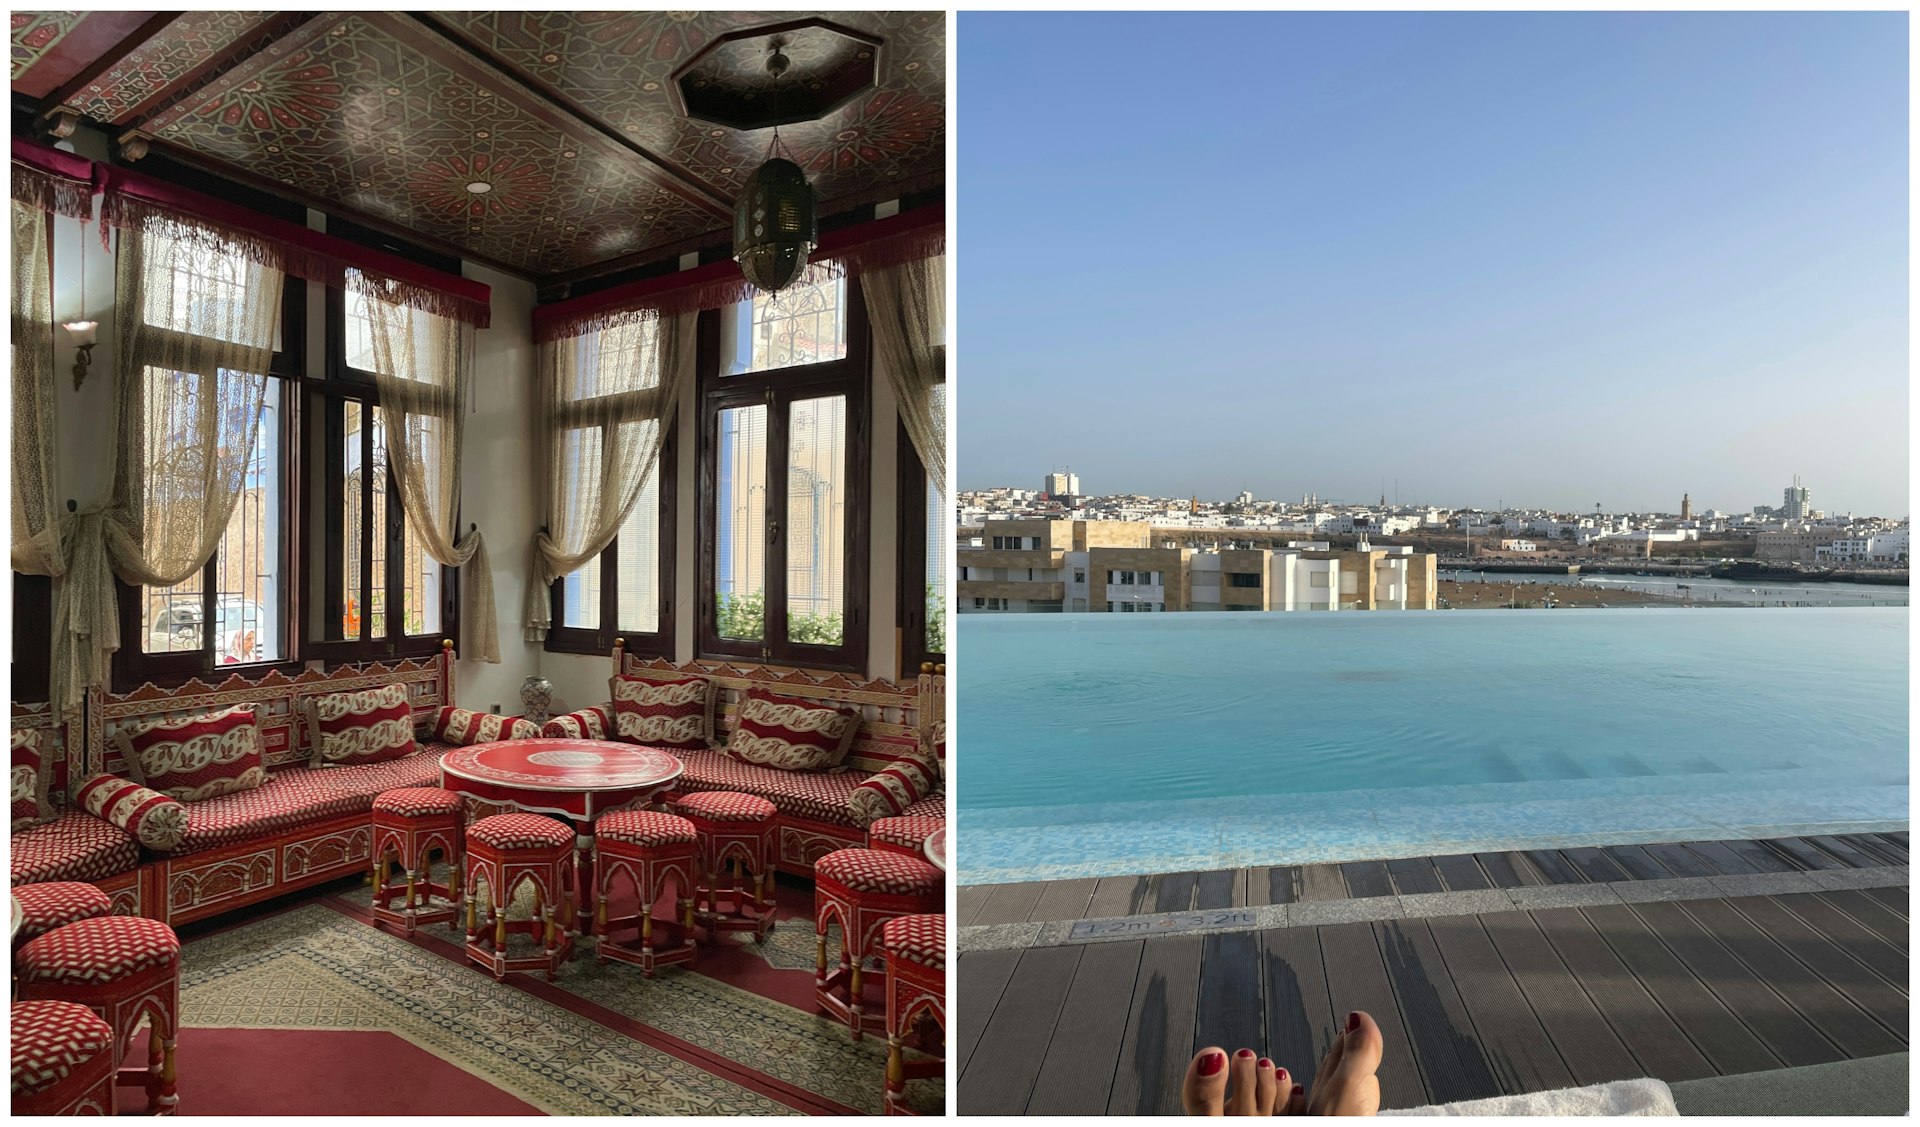 L: The traditionally-styled lounge area of a medina in Morocco. R: Deepa poses by a swimming pool